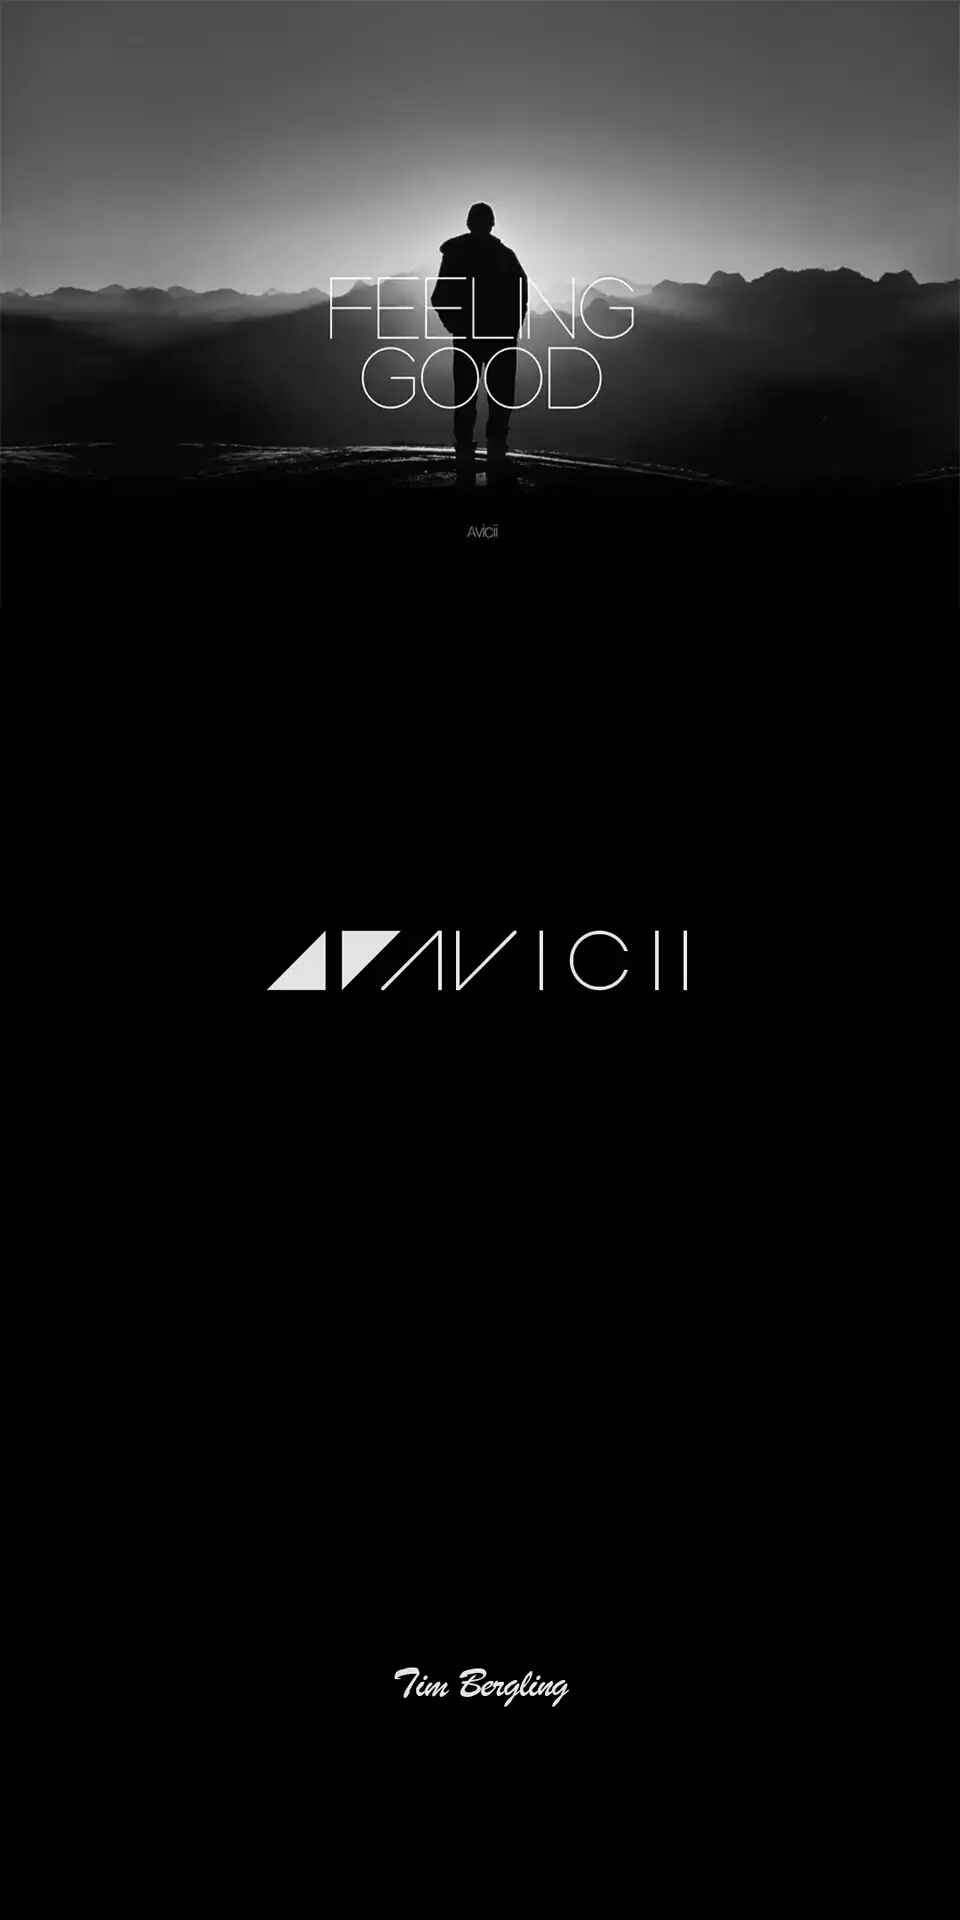 forever avicii forever without you thanks,tim